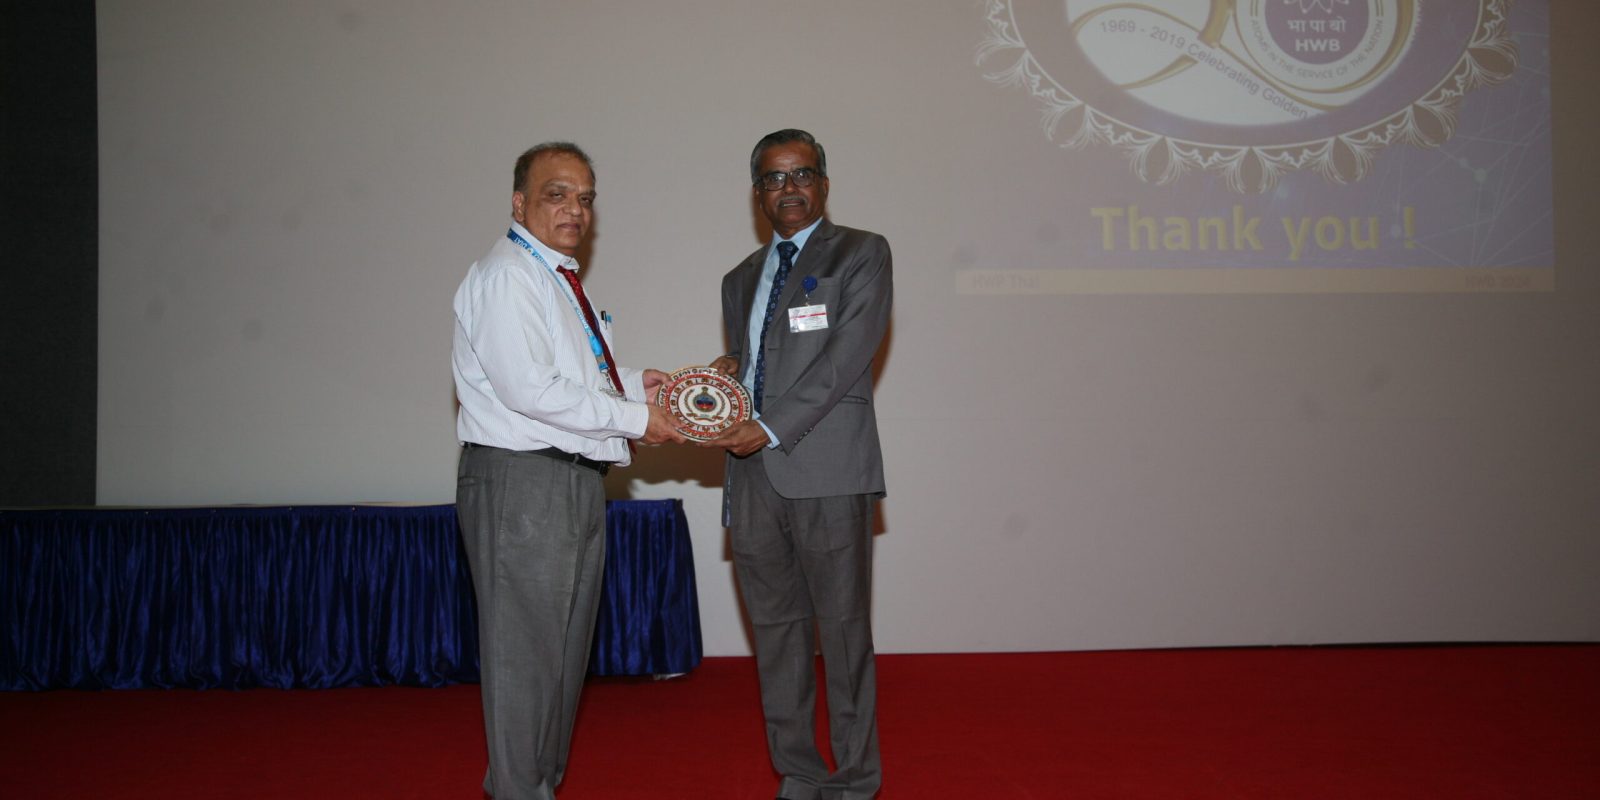 During the Technology Day ceremony, the Vice Chancellor presents a memento to the Chief Guest.